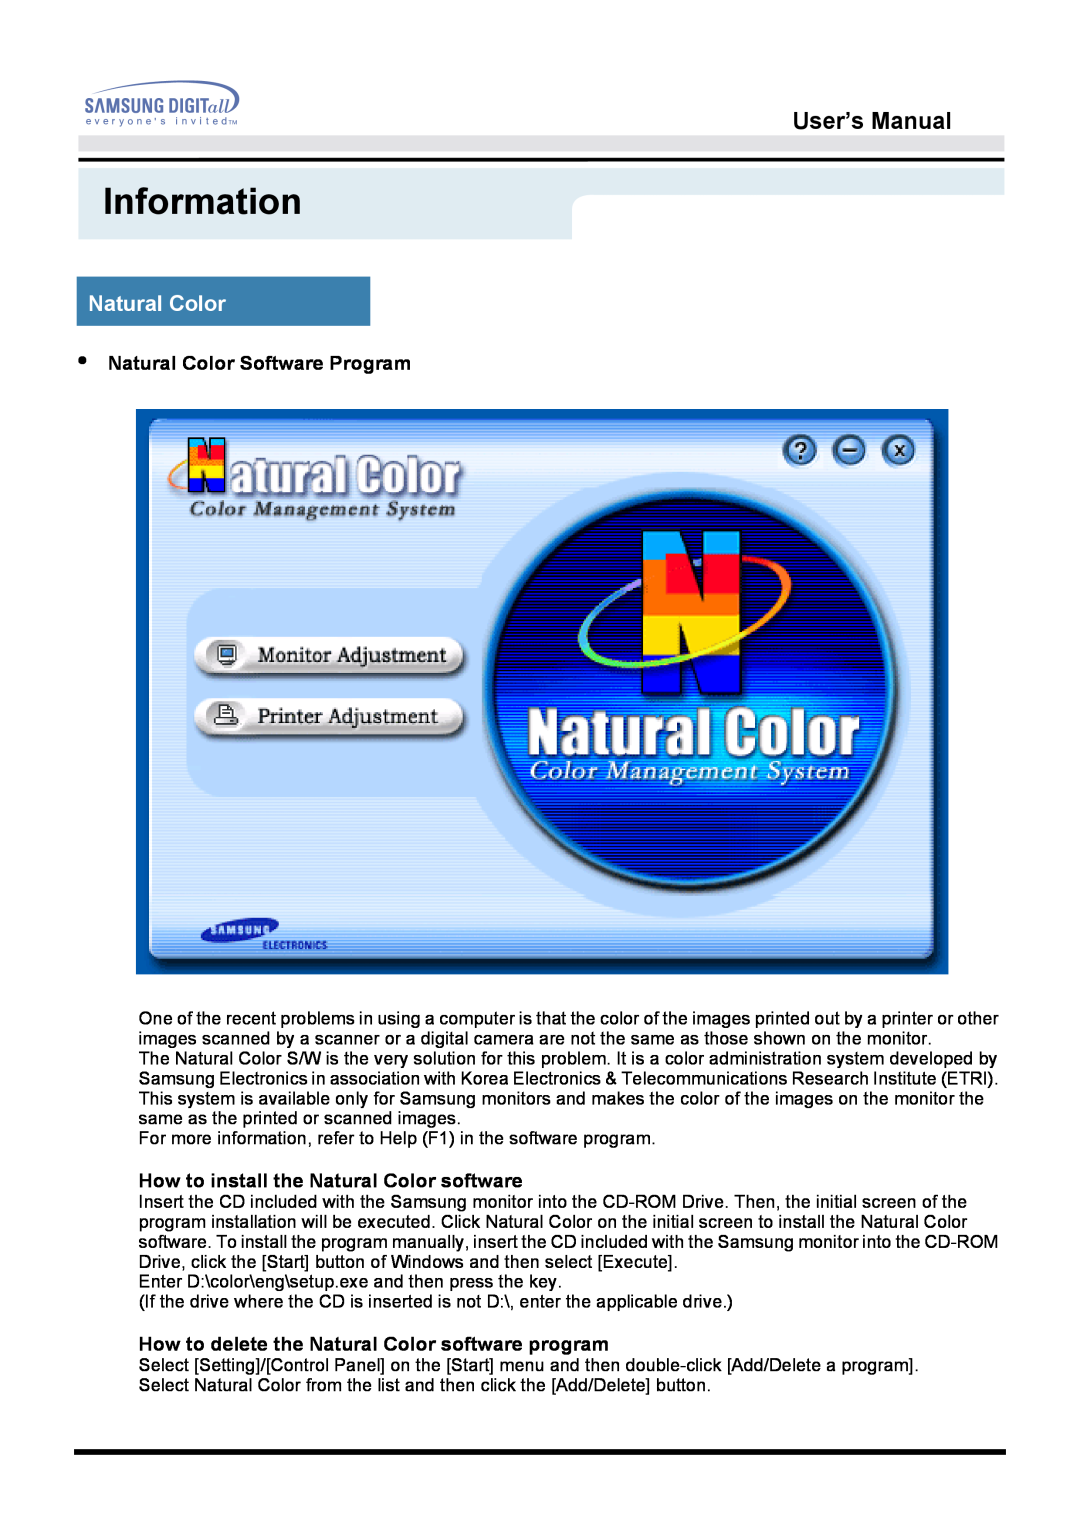 Samsung 151D Information, User’s Manual, Natural Color Software Program, How to install the Natural Color software 